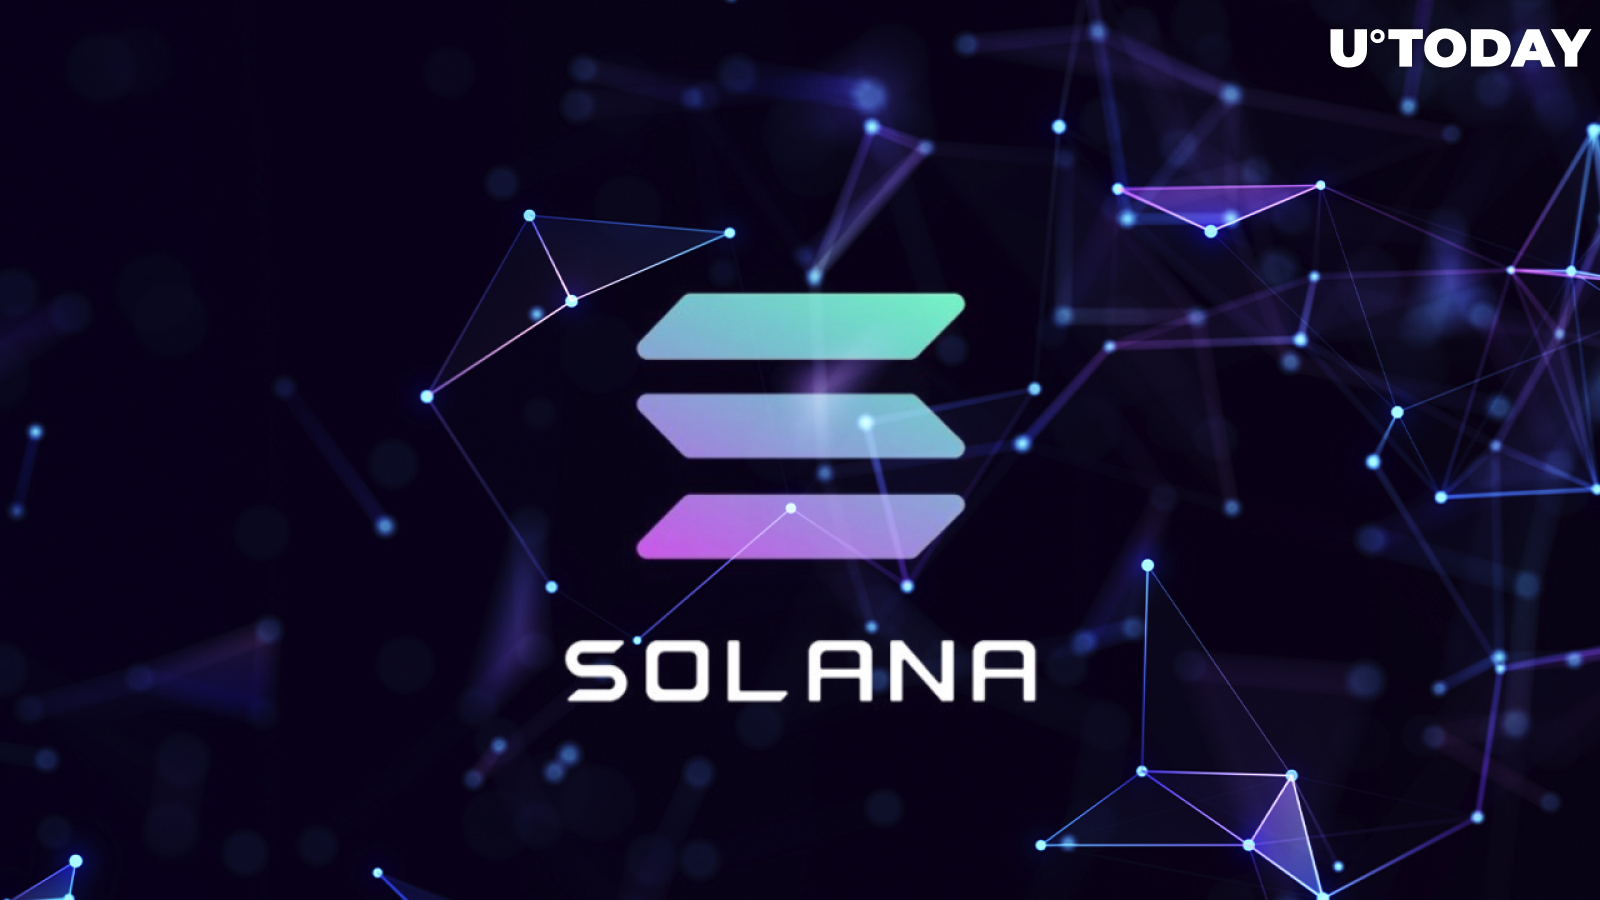 NFT Marketplace Rarible Looking to Add Support for Solana